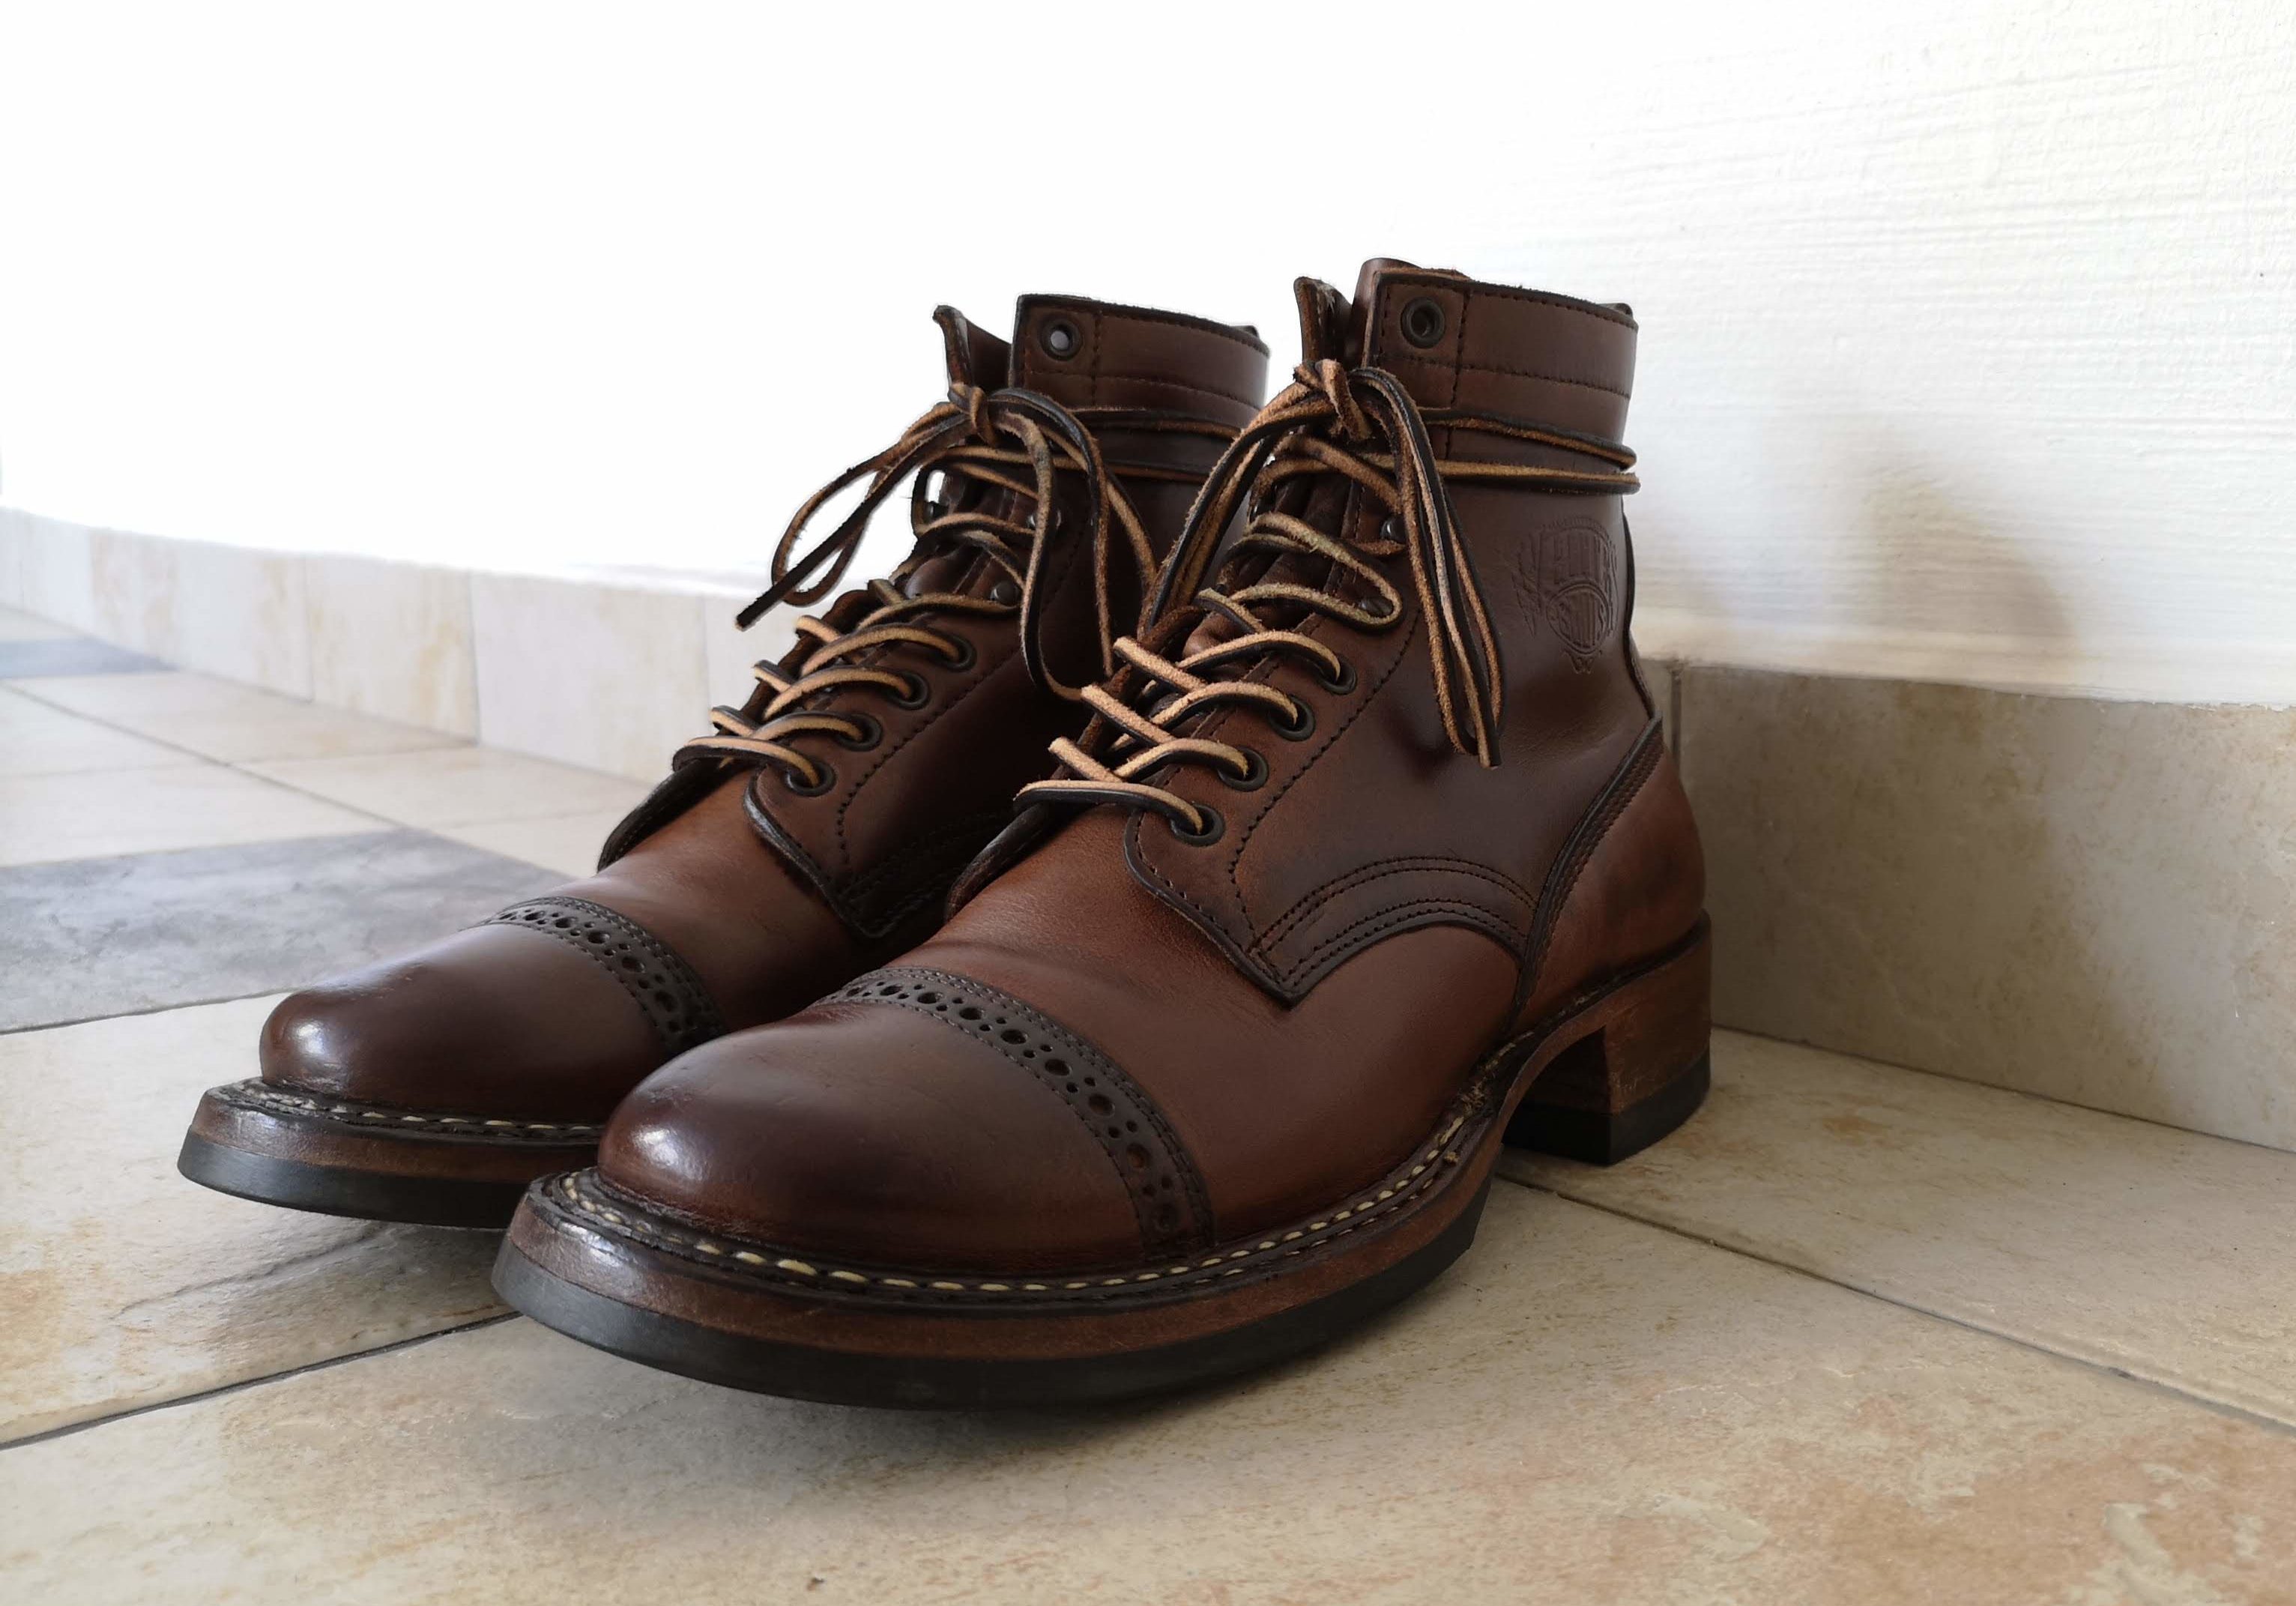 White's Boots Bounty Hunter Review—A Handsomely Rugged Monster of a Boot -  Stitchdown